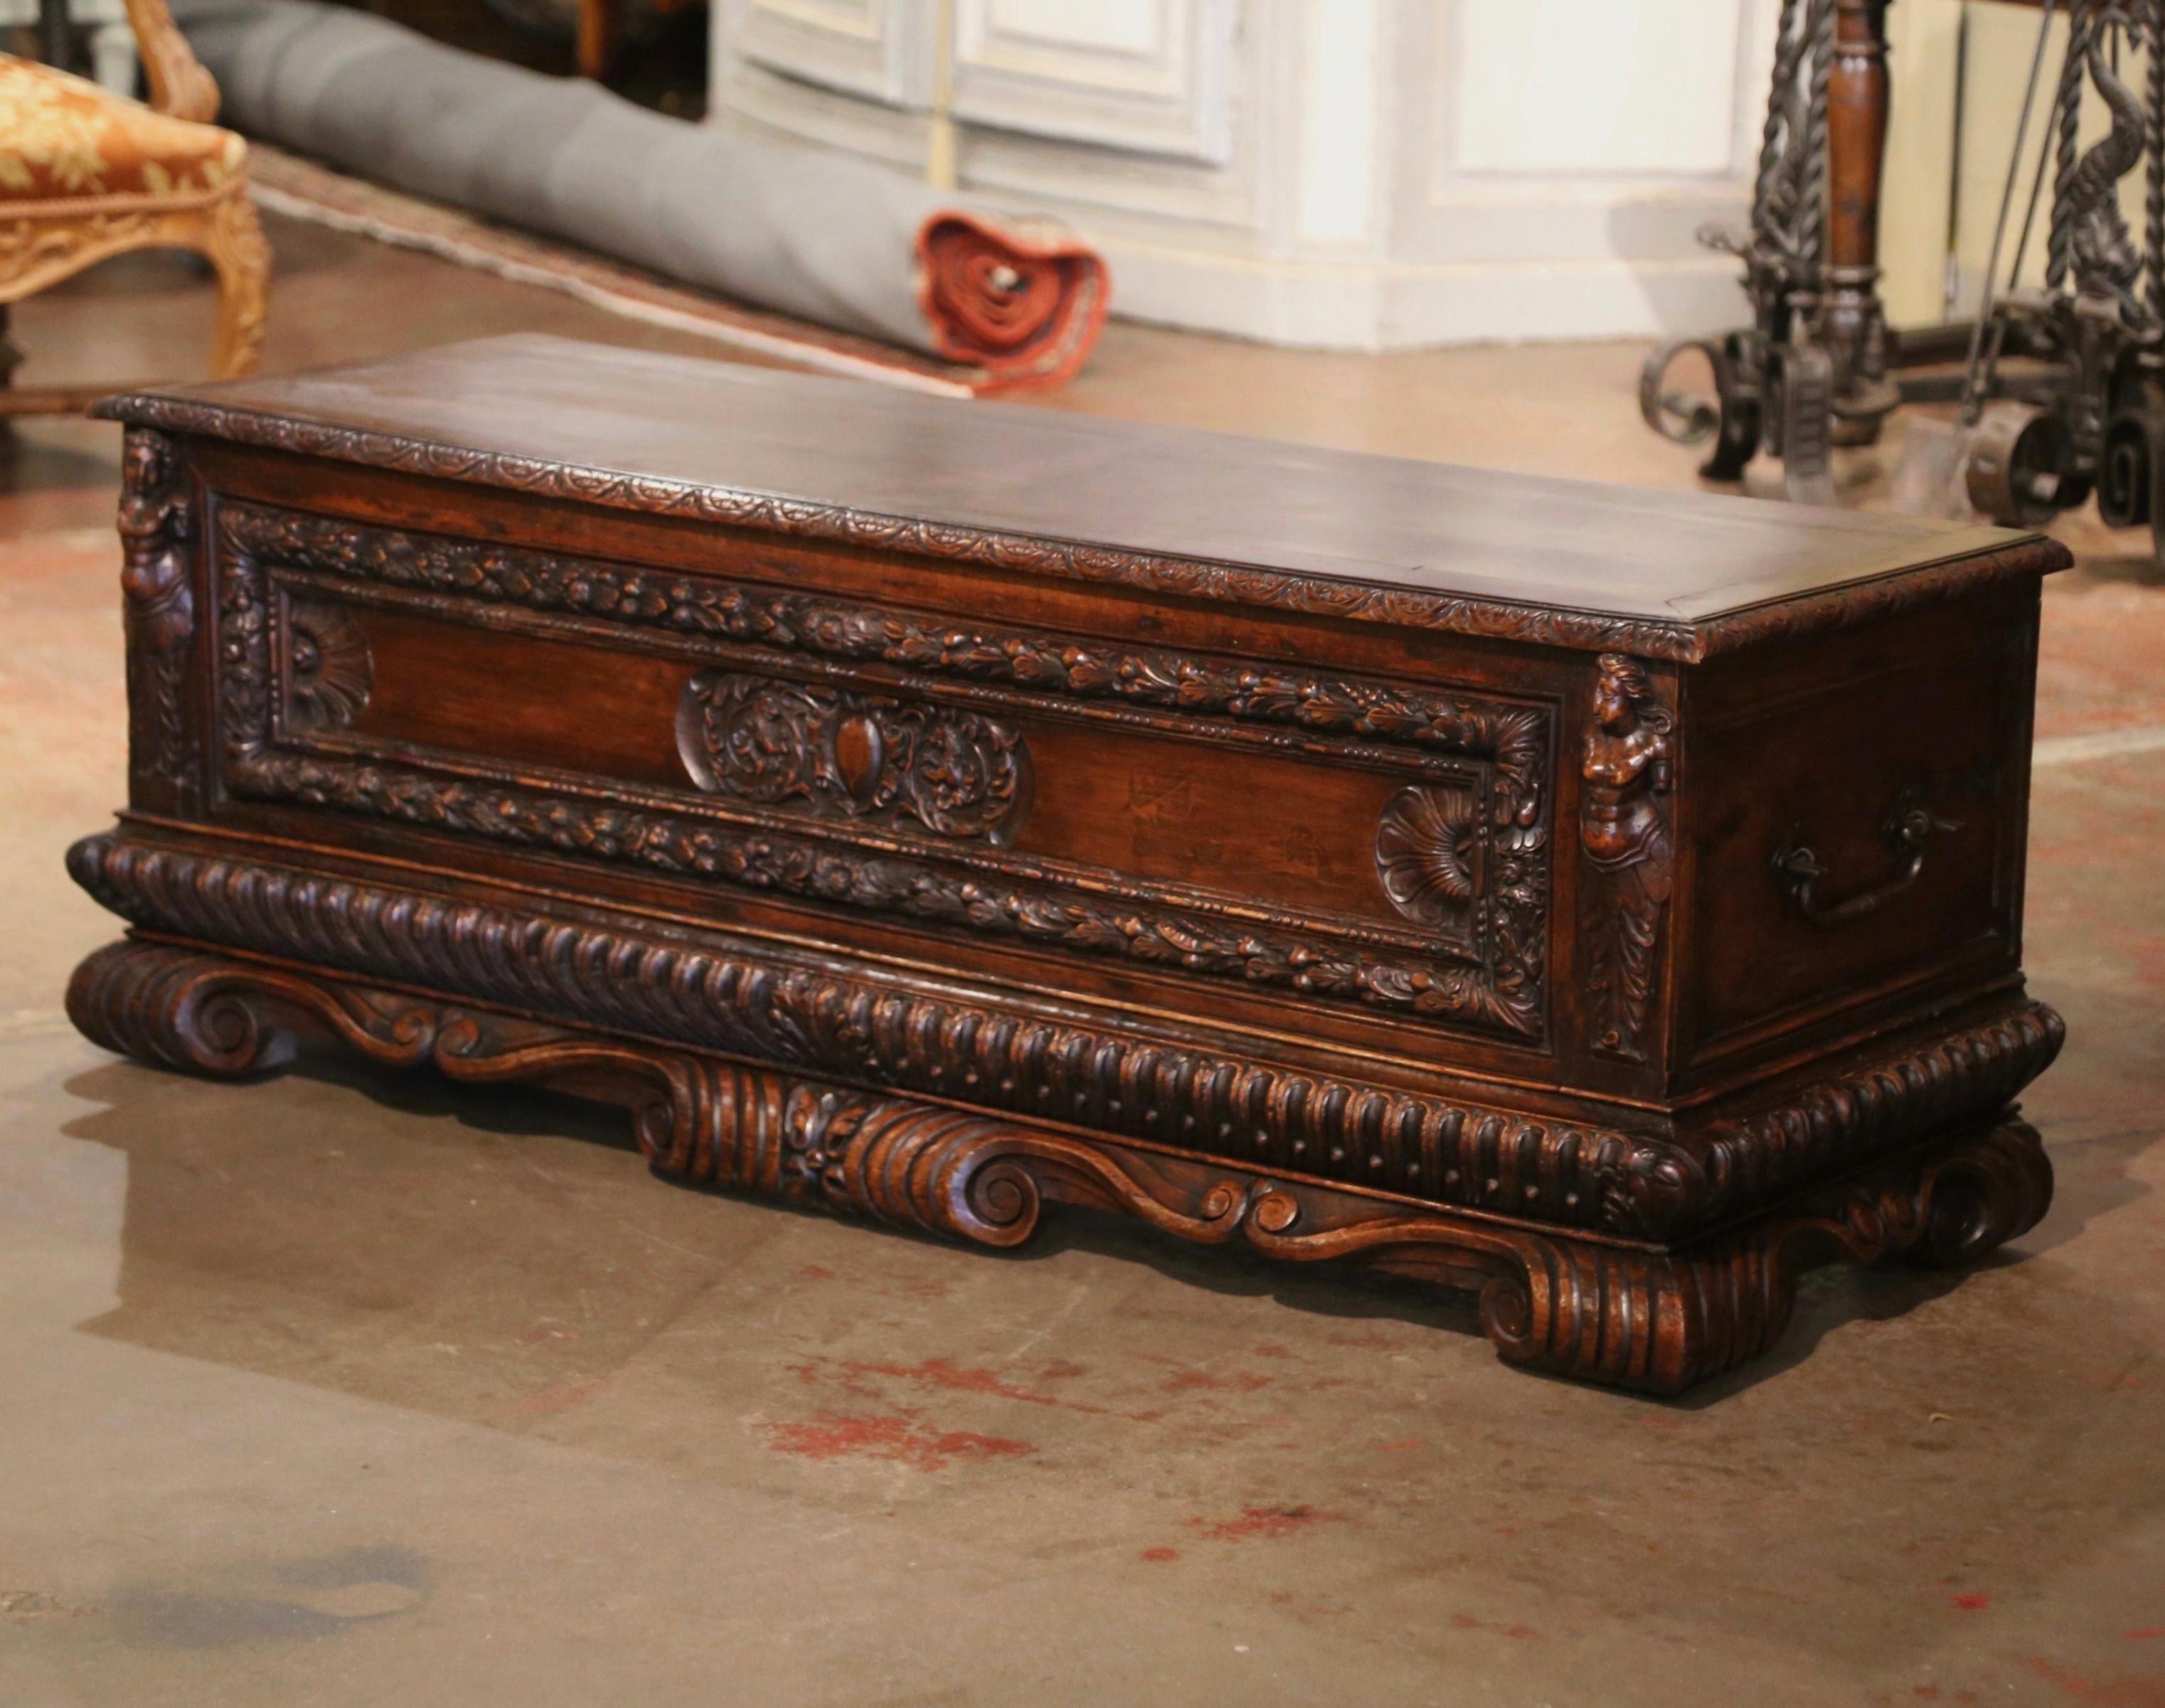 This elegant, antique fruitwood cassone was crafted in Italy, circa 1830. Standing on five scrolled feet over a scalloped apron, the base of the stately trunk is decorated with a figure on either side, and the facade panel features a foliage gilt